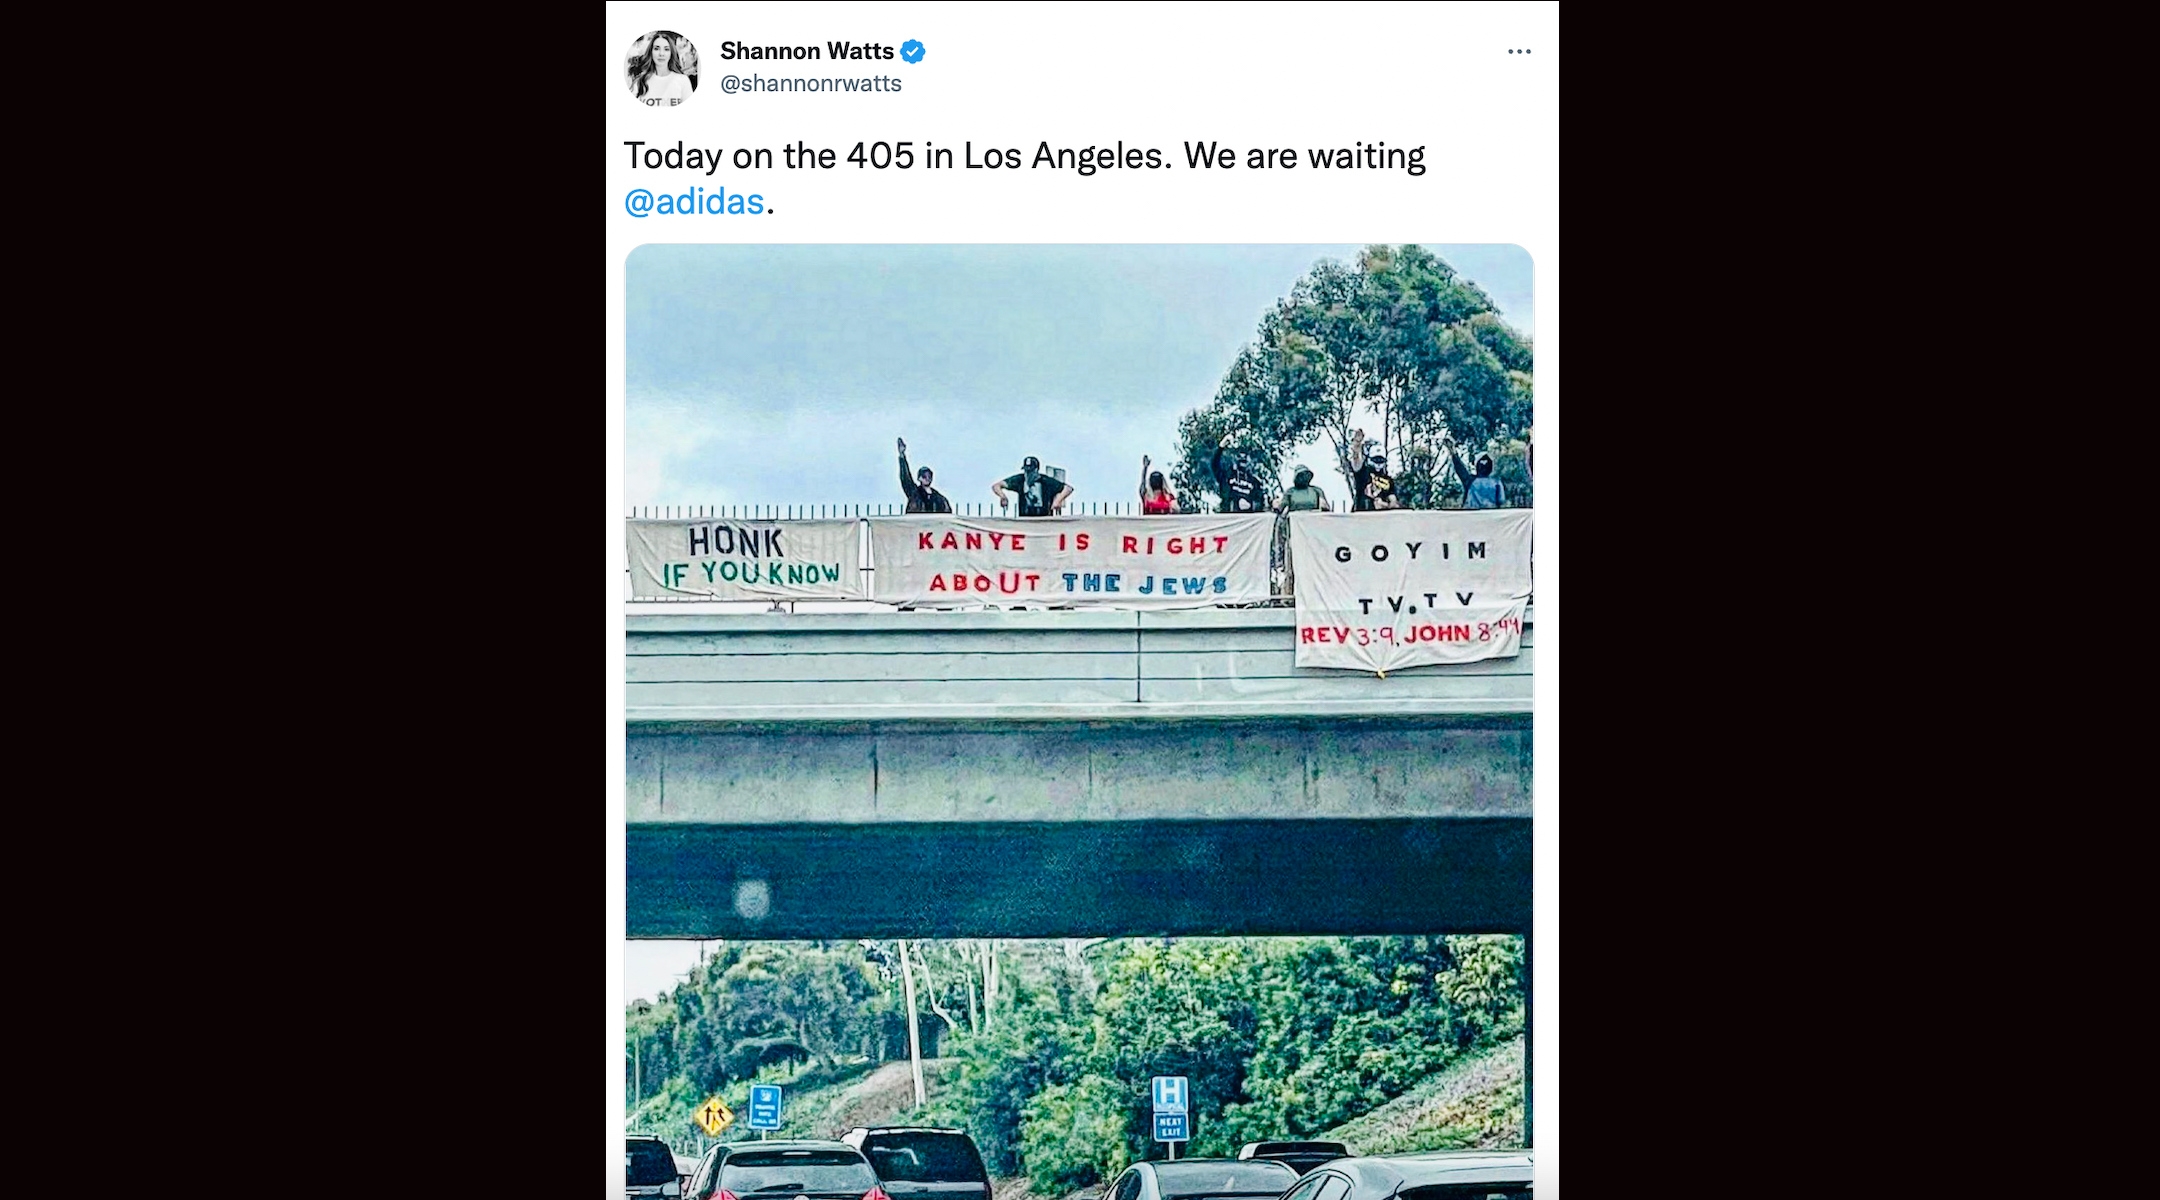 Pictures of the Goyim Defense League banners supporting Kanye West’s comments about Jews went viral after they were captured in Los Angeles, Oct. 22, 2022. (Screenshot from Twitter)